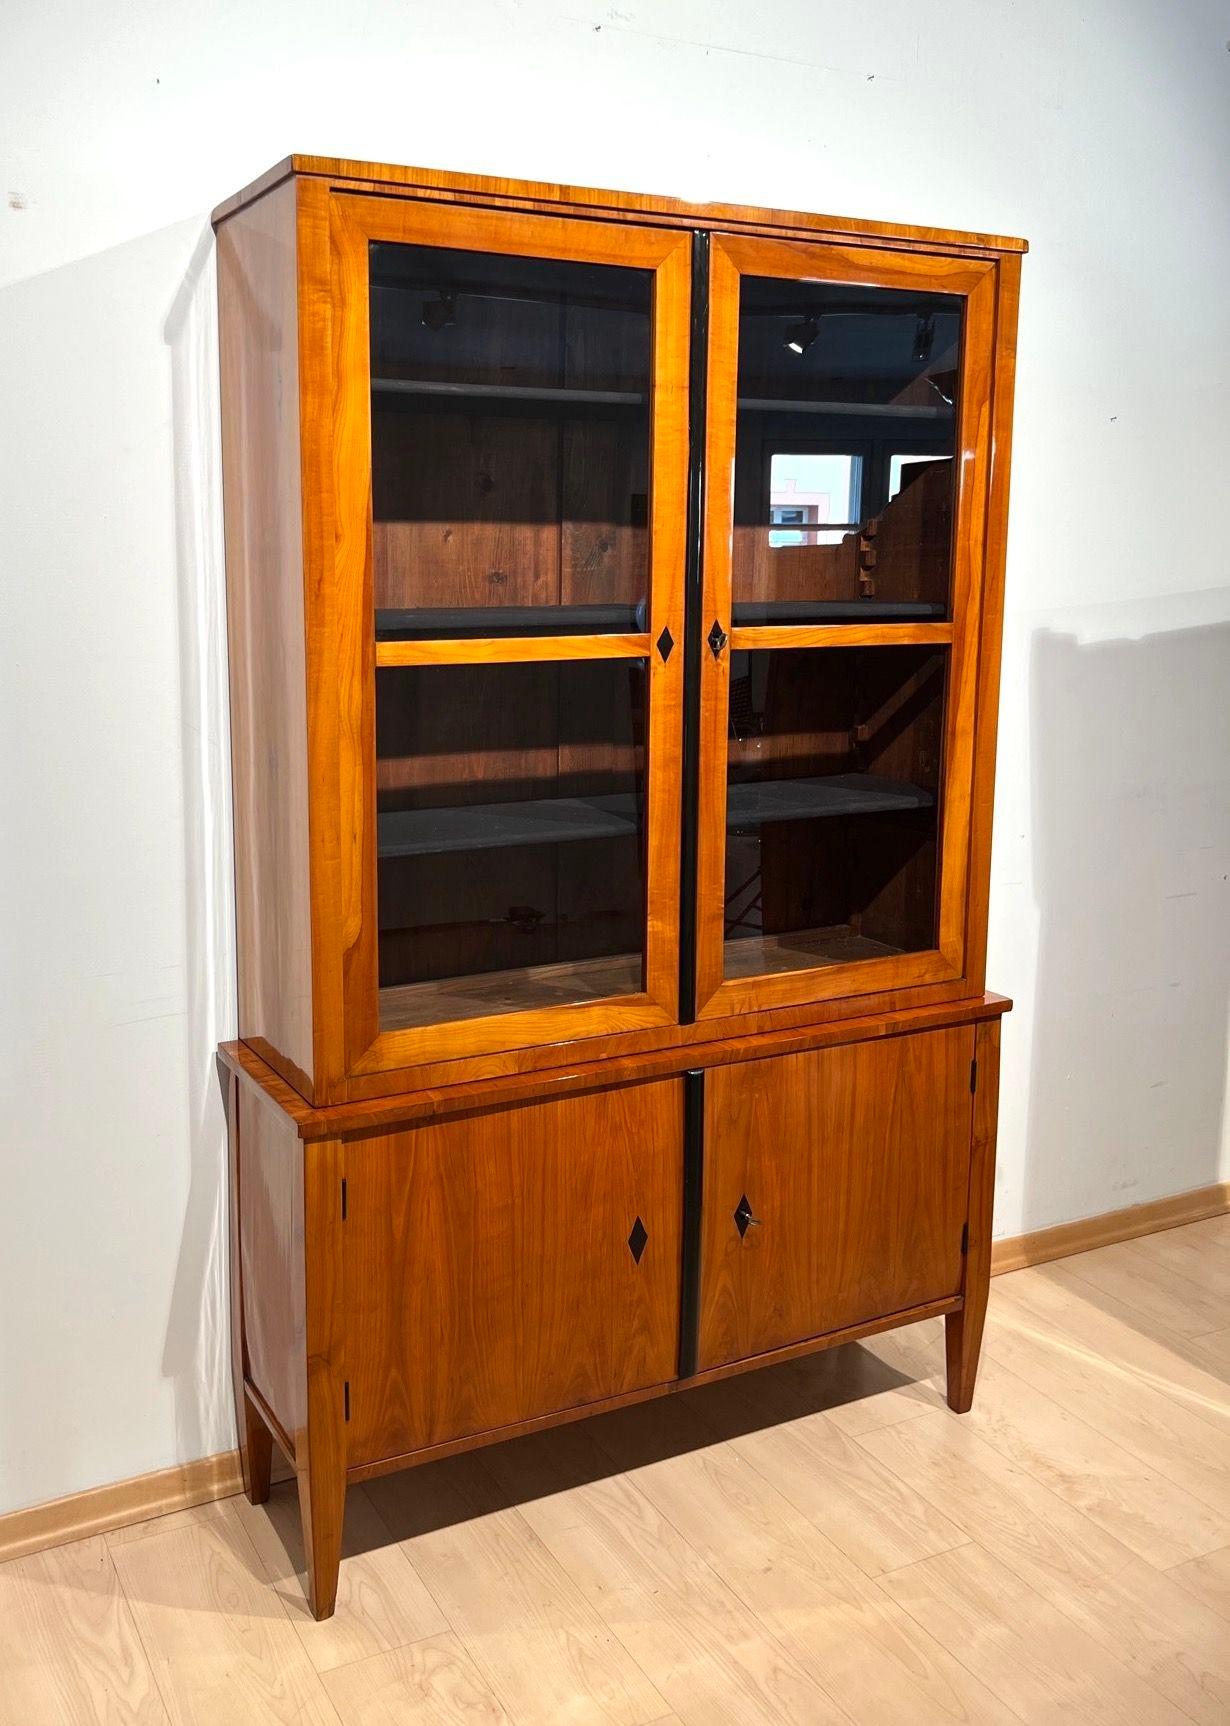 Beautiful unadorned Biedermeier Vitrine or Top Showcase, display case or two-part bookcase in cherry veneer from south Germany around 1830.
Cherry wood veneered on softwood. Upper part as a two-door showcase with glass. Ebonized gutter and diamond